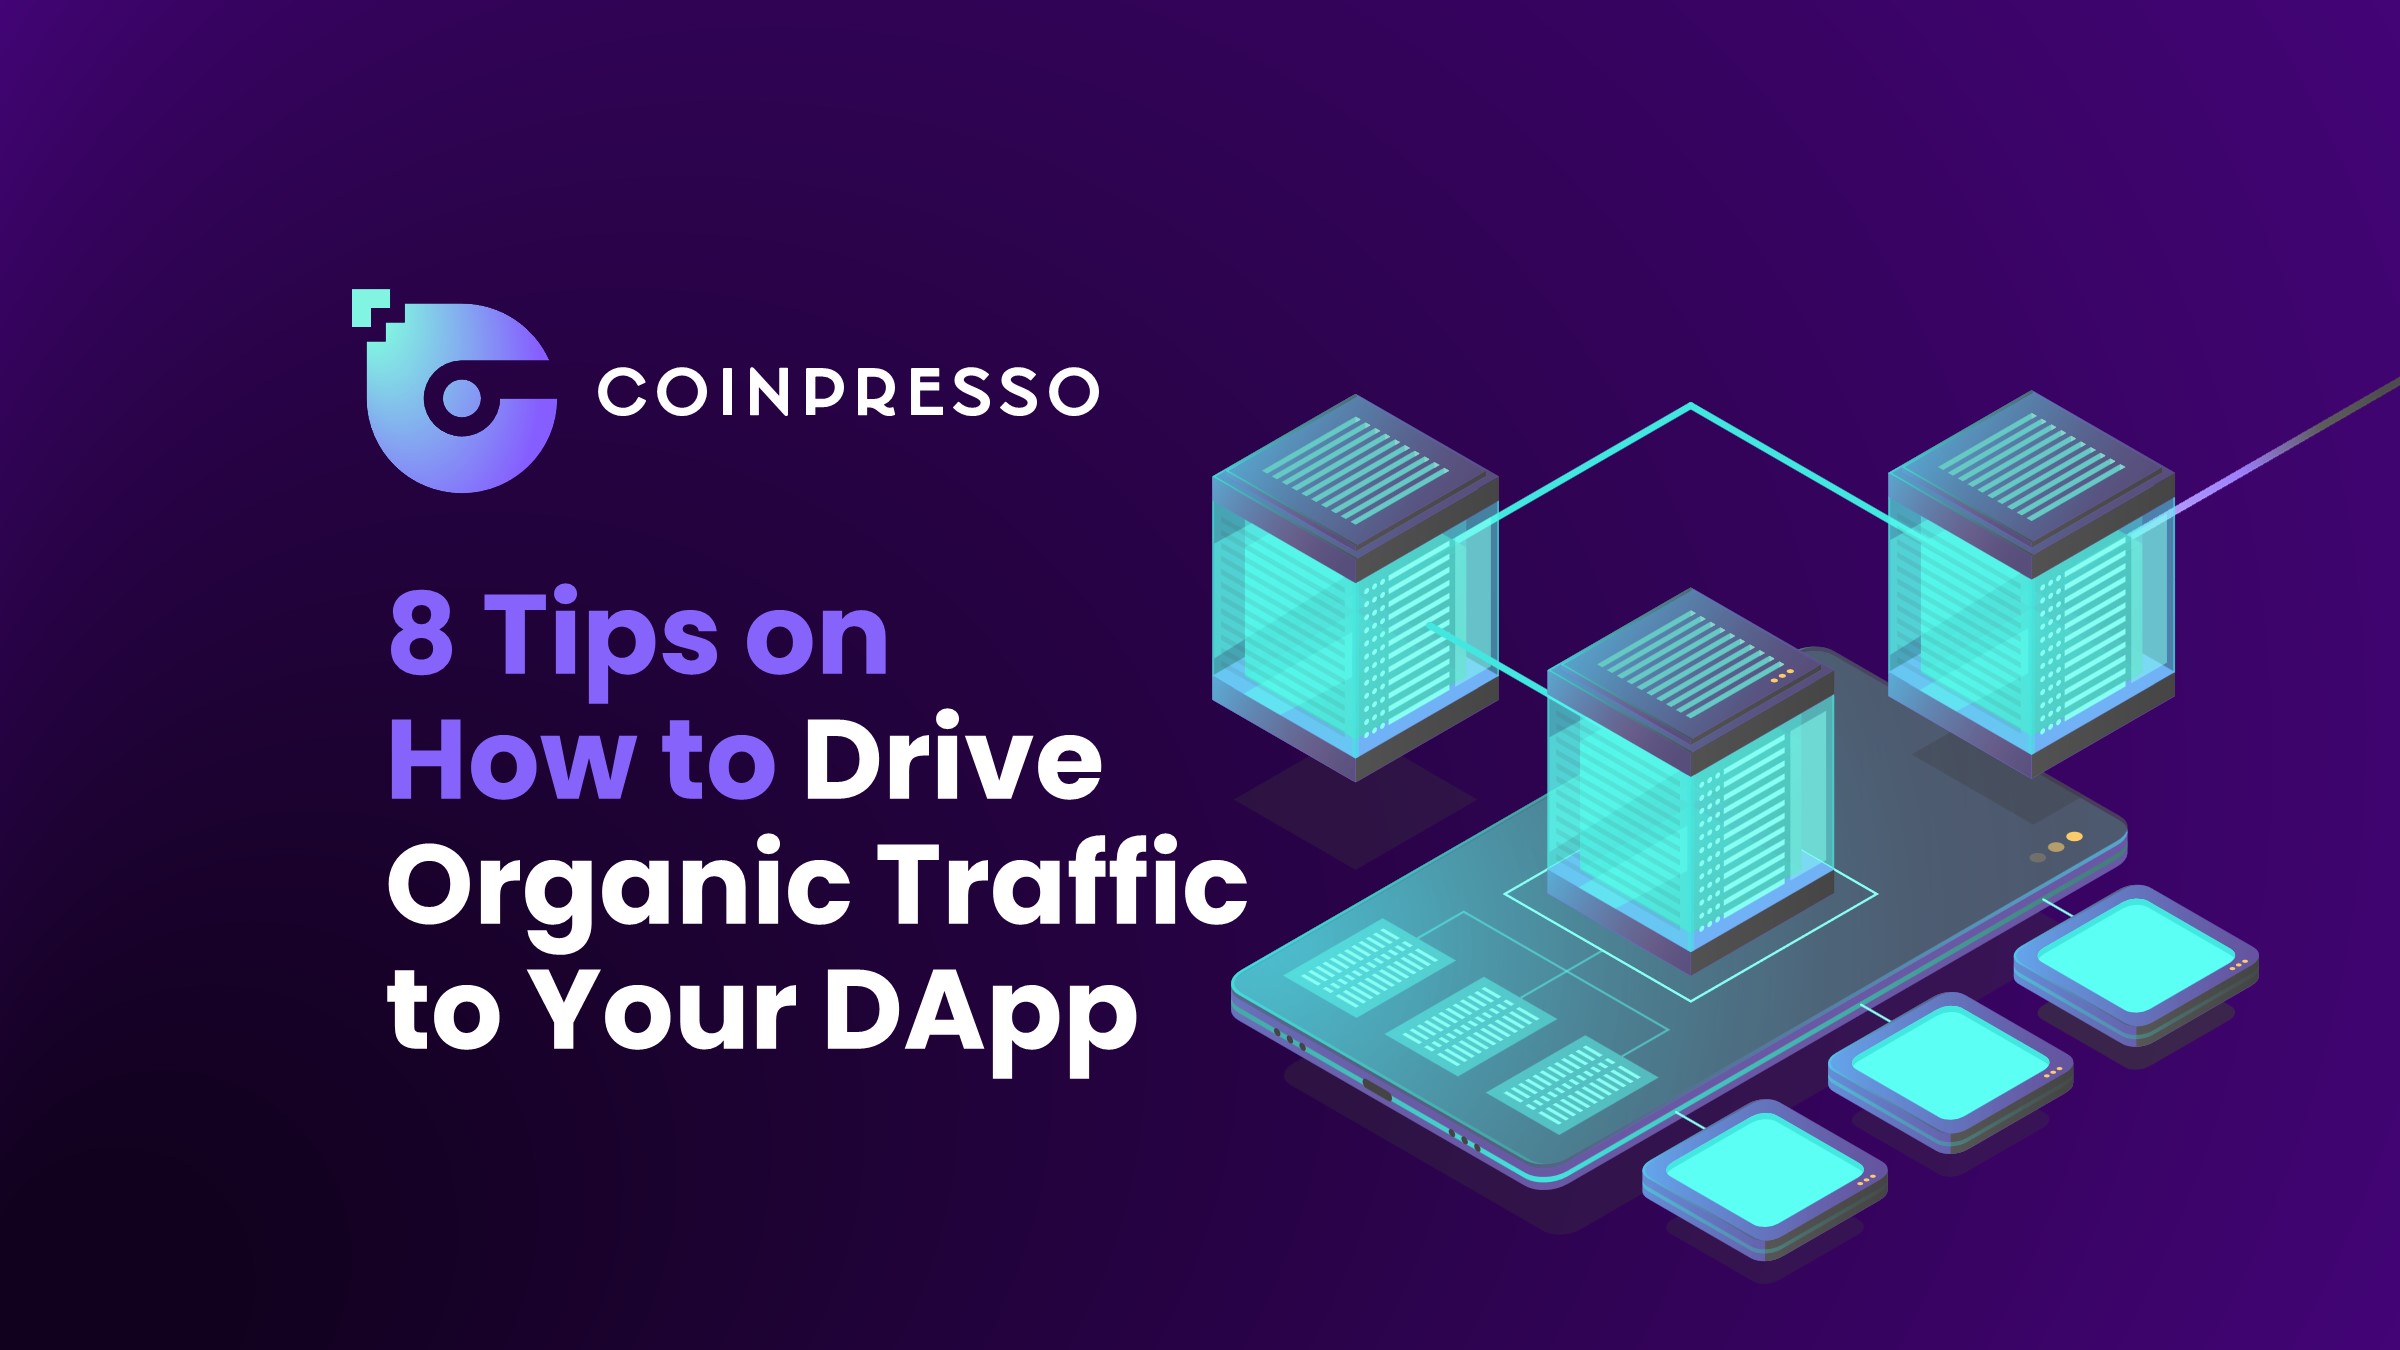 8 Tips on How to Drive Organic Traffic to Your DApp